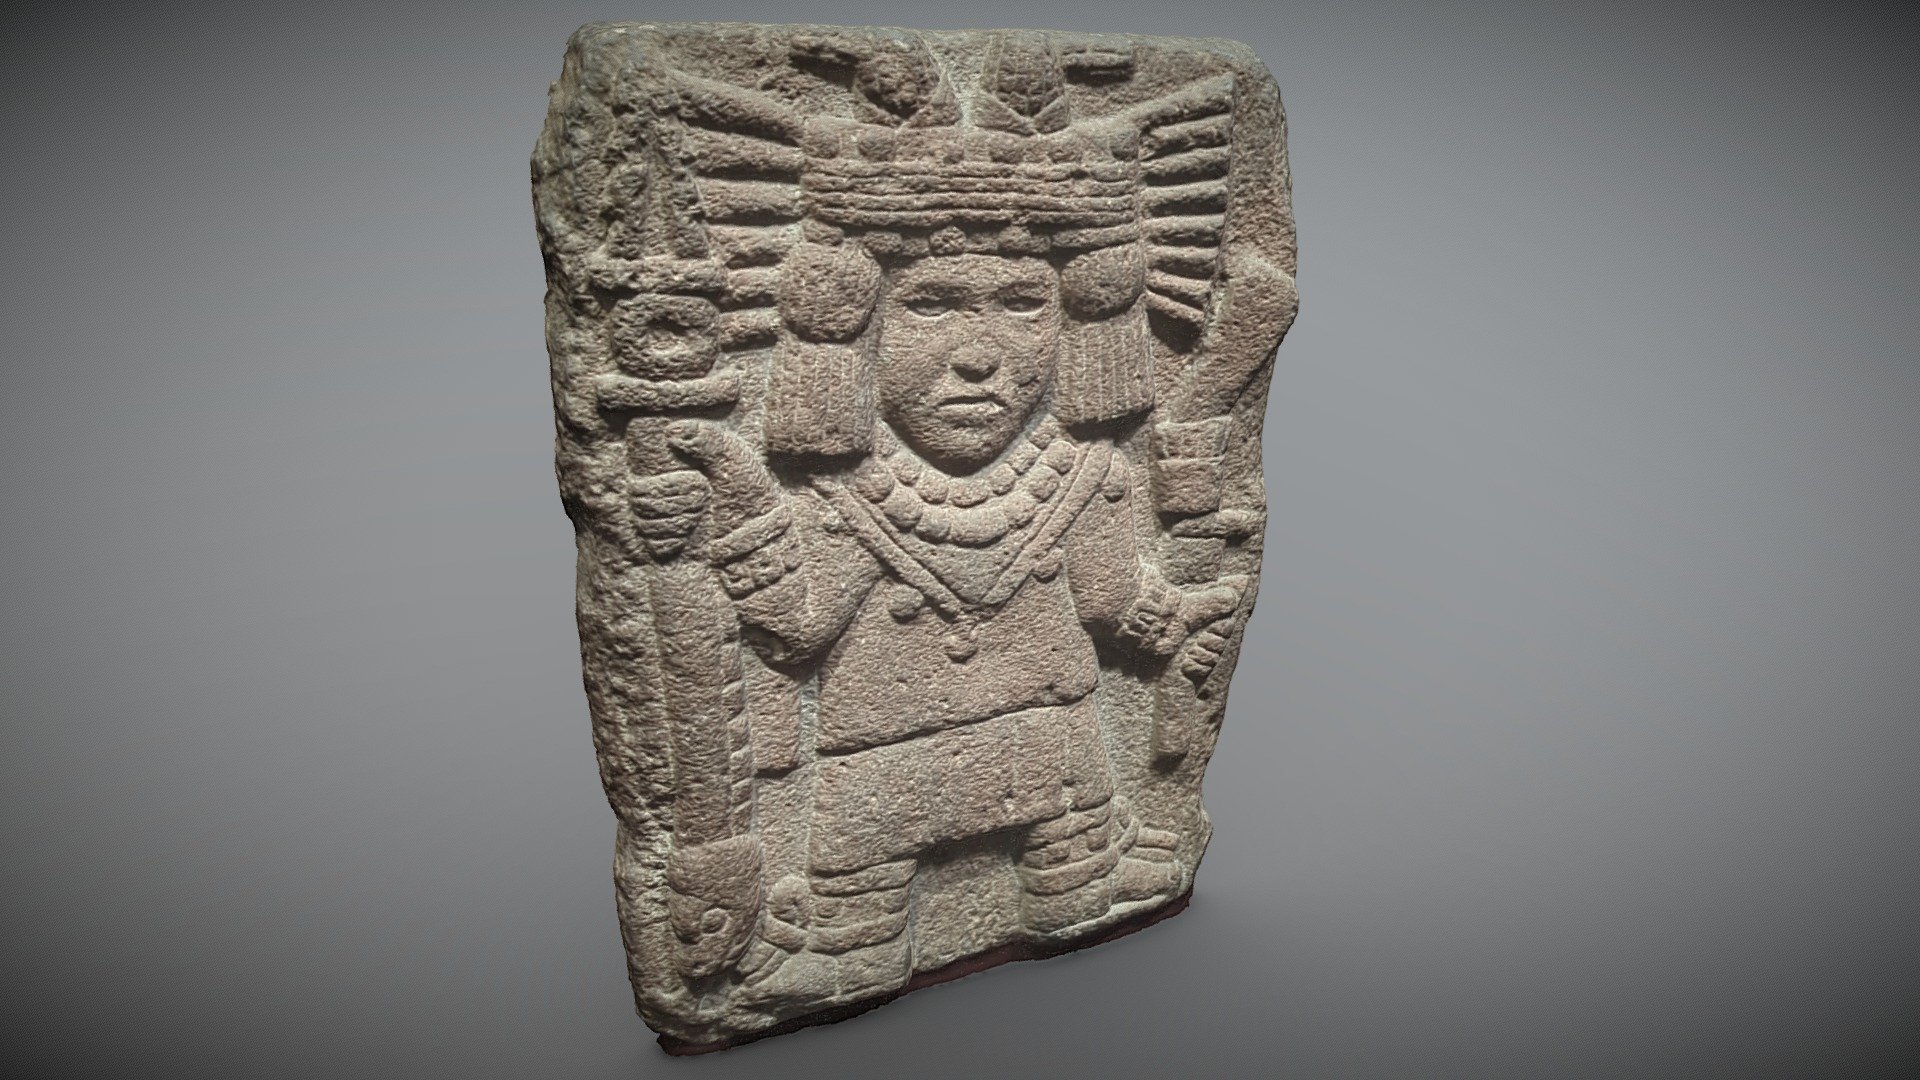 Inca Stone Carving - 3D model by ShacharWeis [861e9dc] - Sketchfab